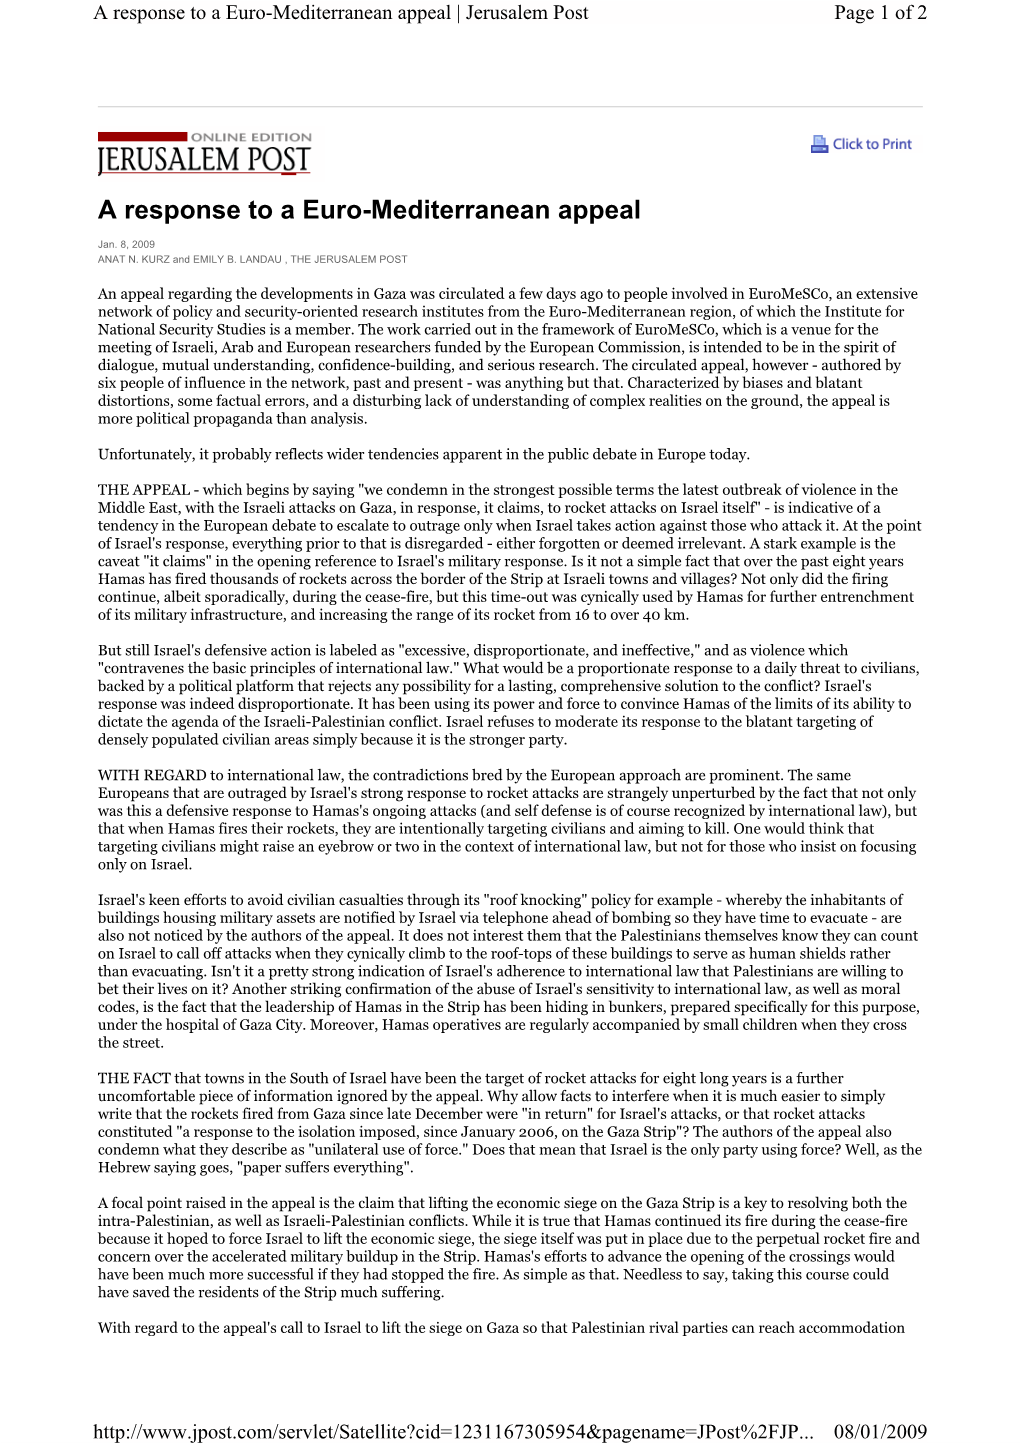 A Response to a Euro-Mediterranean Appeal | Jerusalem Post Page 1 of 2